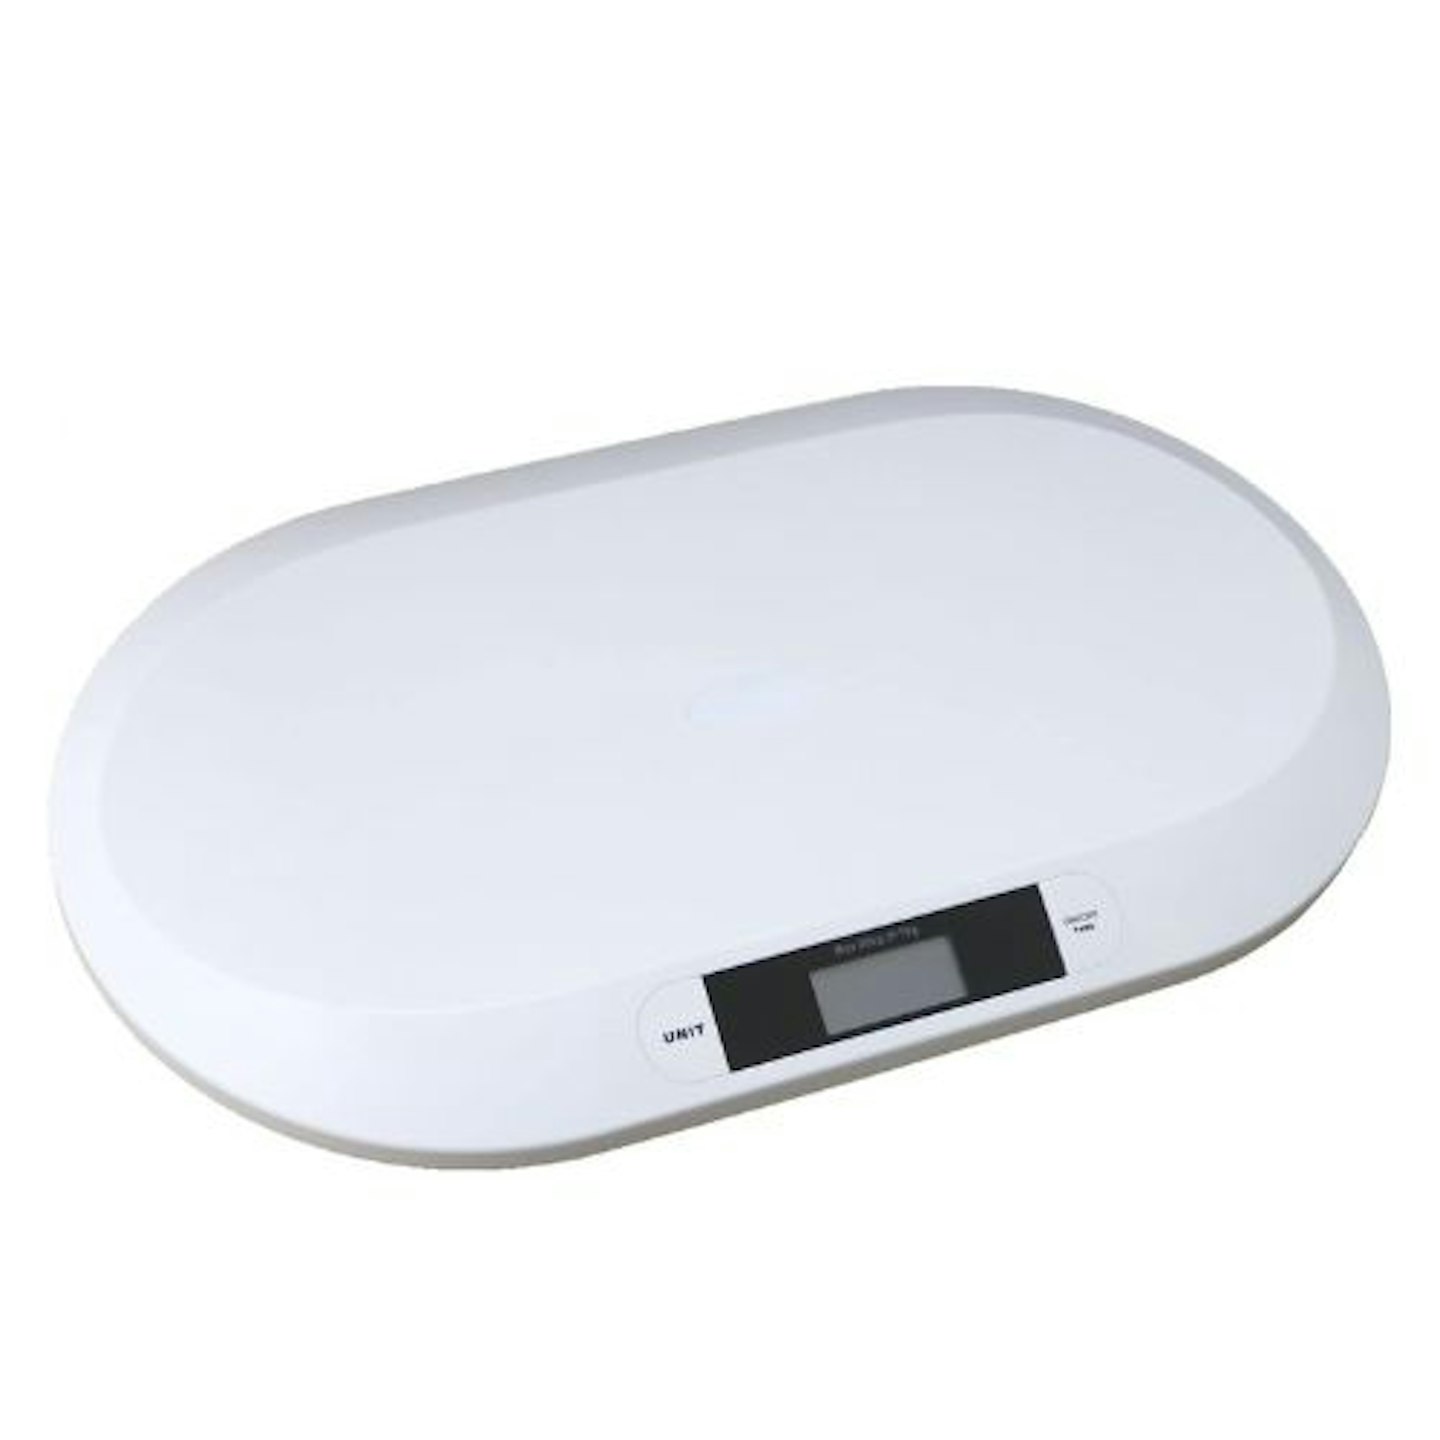 SmartWeigh Baby Scale: Accurate Measurement For Infants And Pets